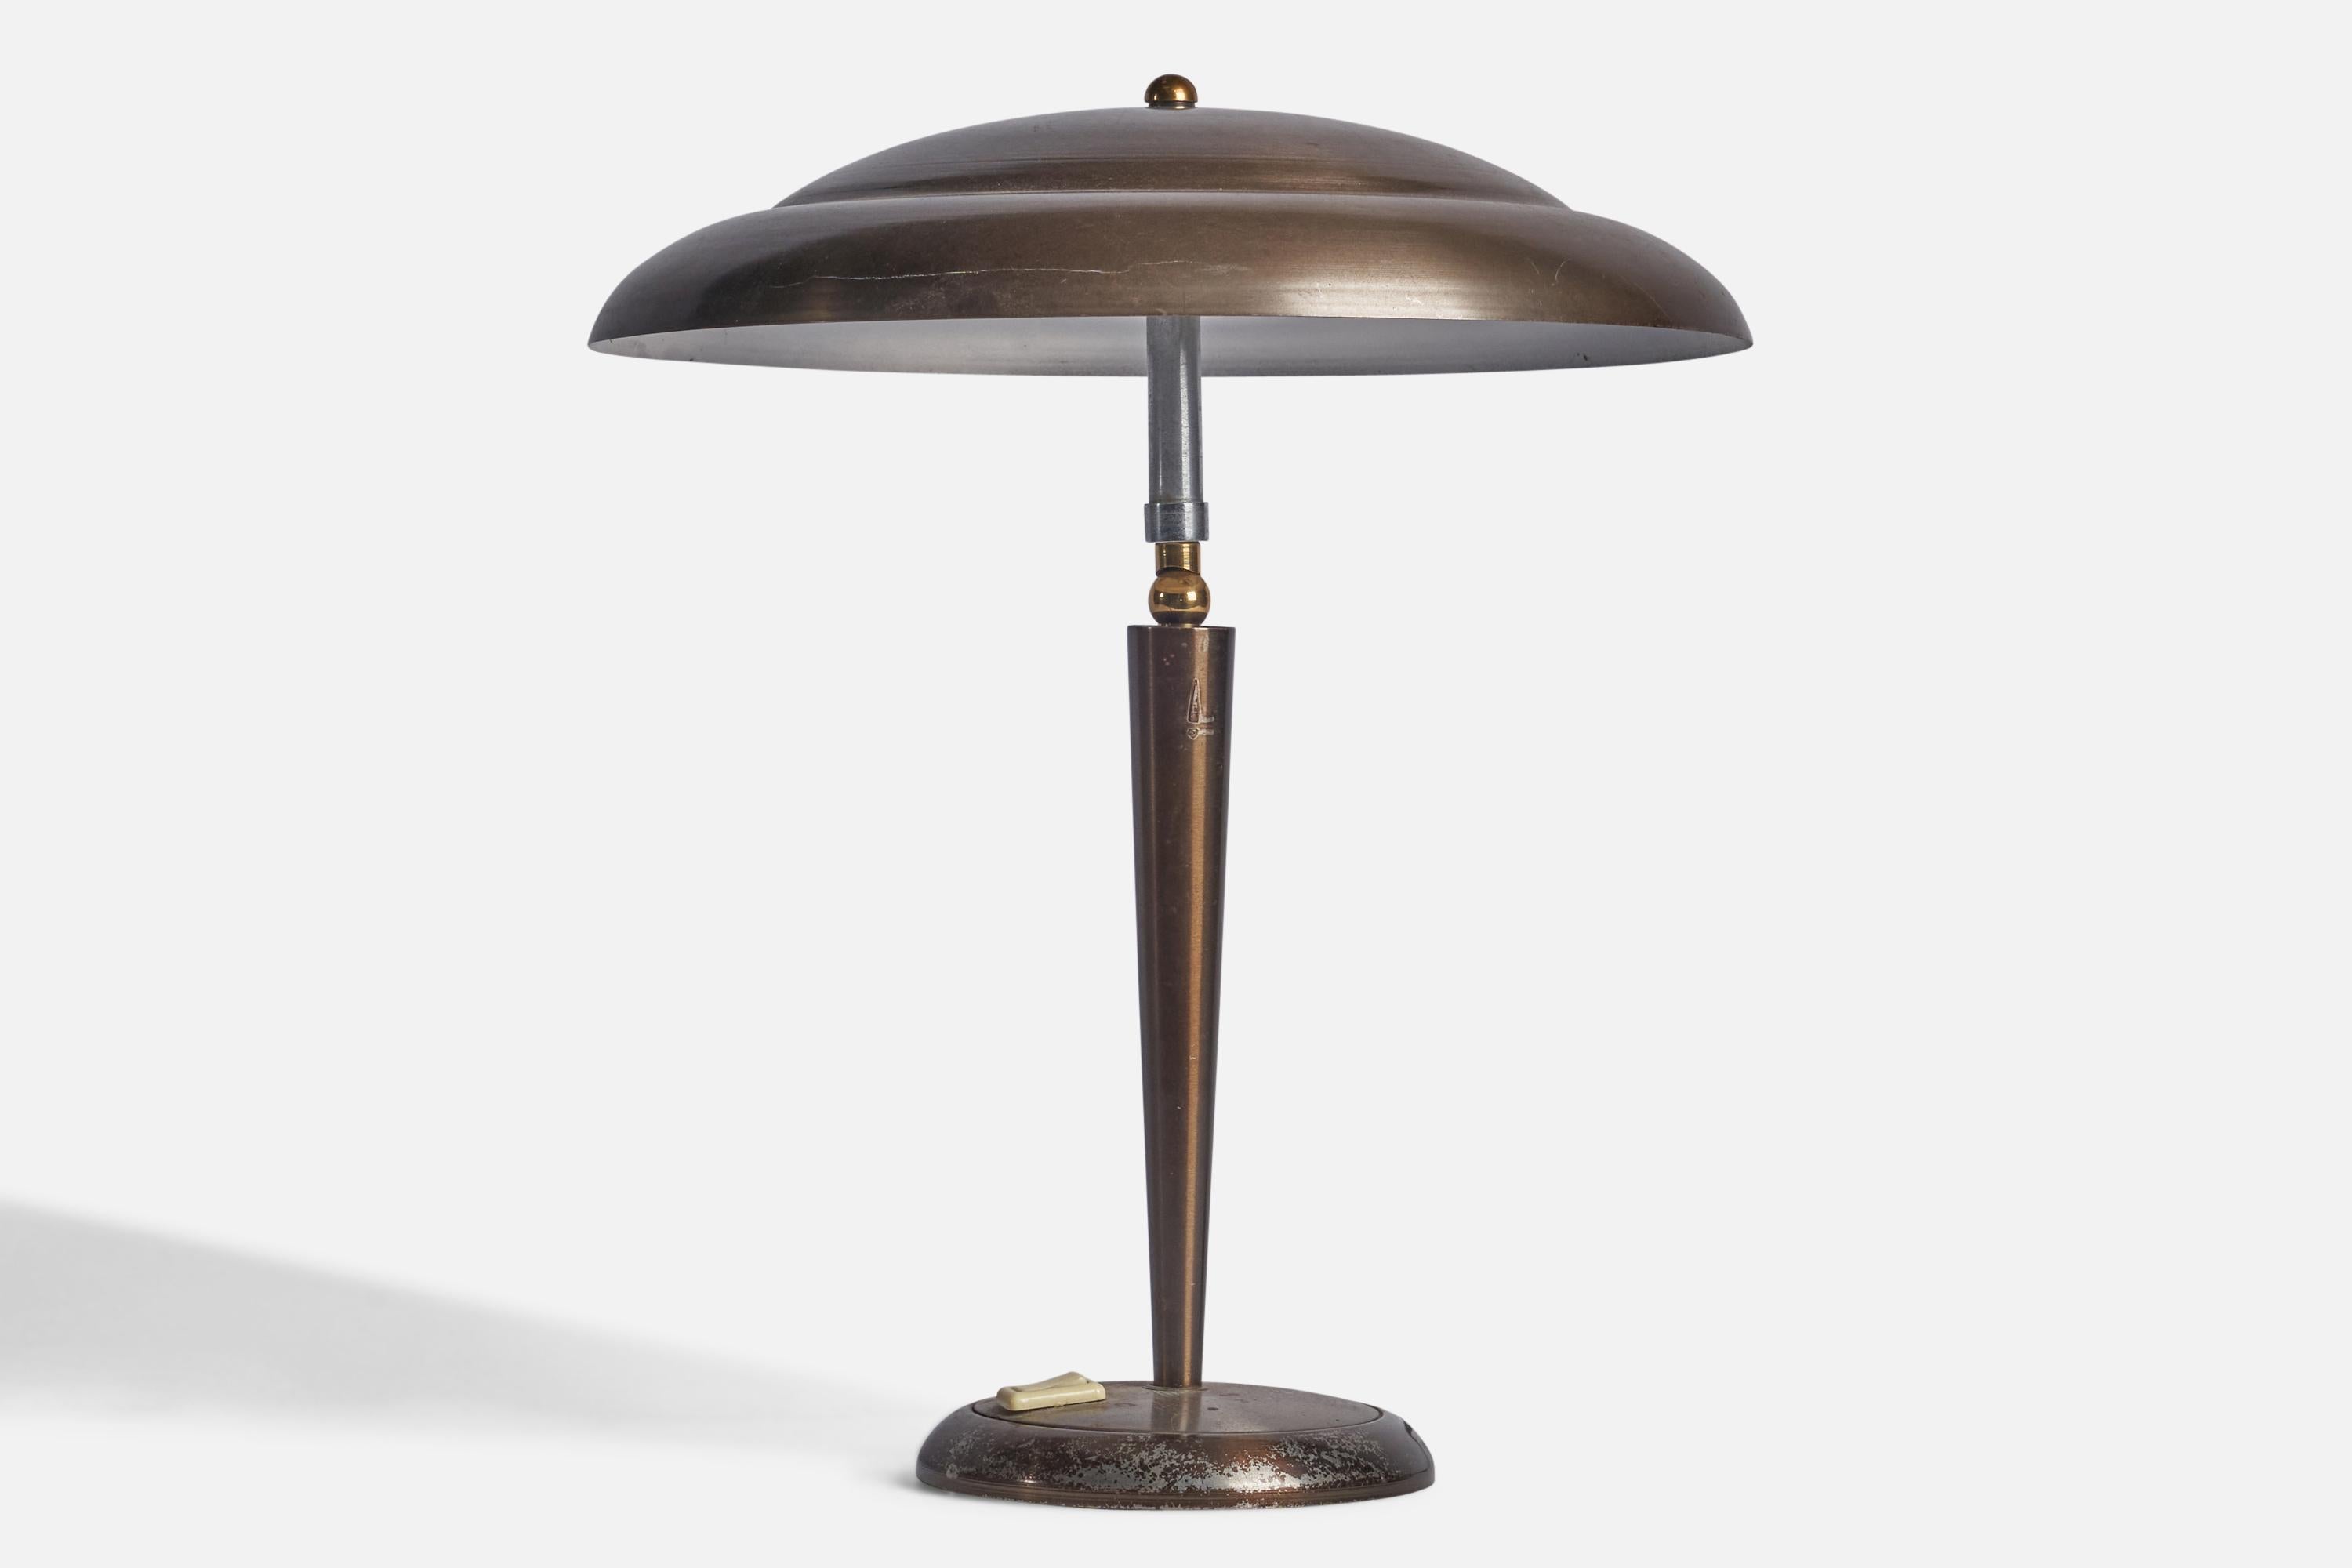 An adjustable table lamp designed and produced in Italy, 1950s.

Overall Dimensions (inches): 16” H x 13.25” Diameter
Bulb Specifications: E-26 Bulb
Number of Sockets: 2
All lighting will be converted for US usage. We are unable to confirm that any